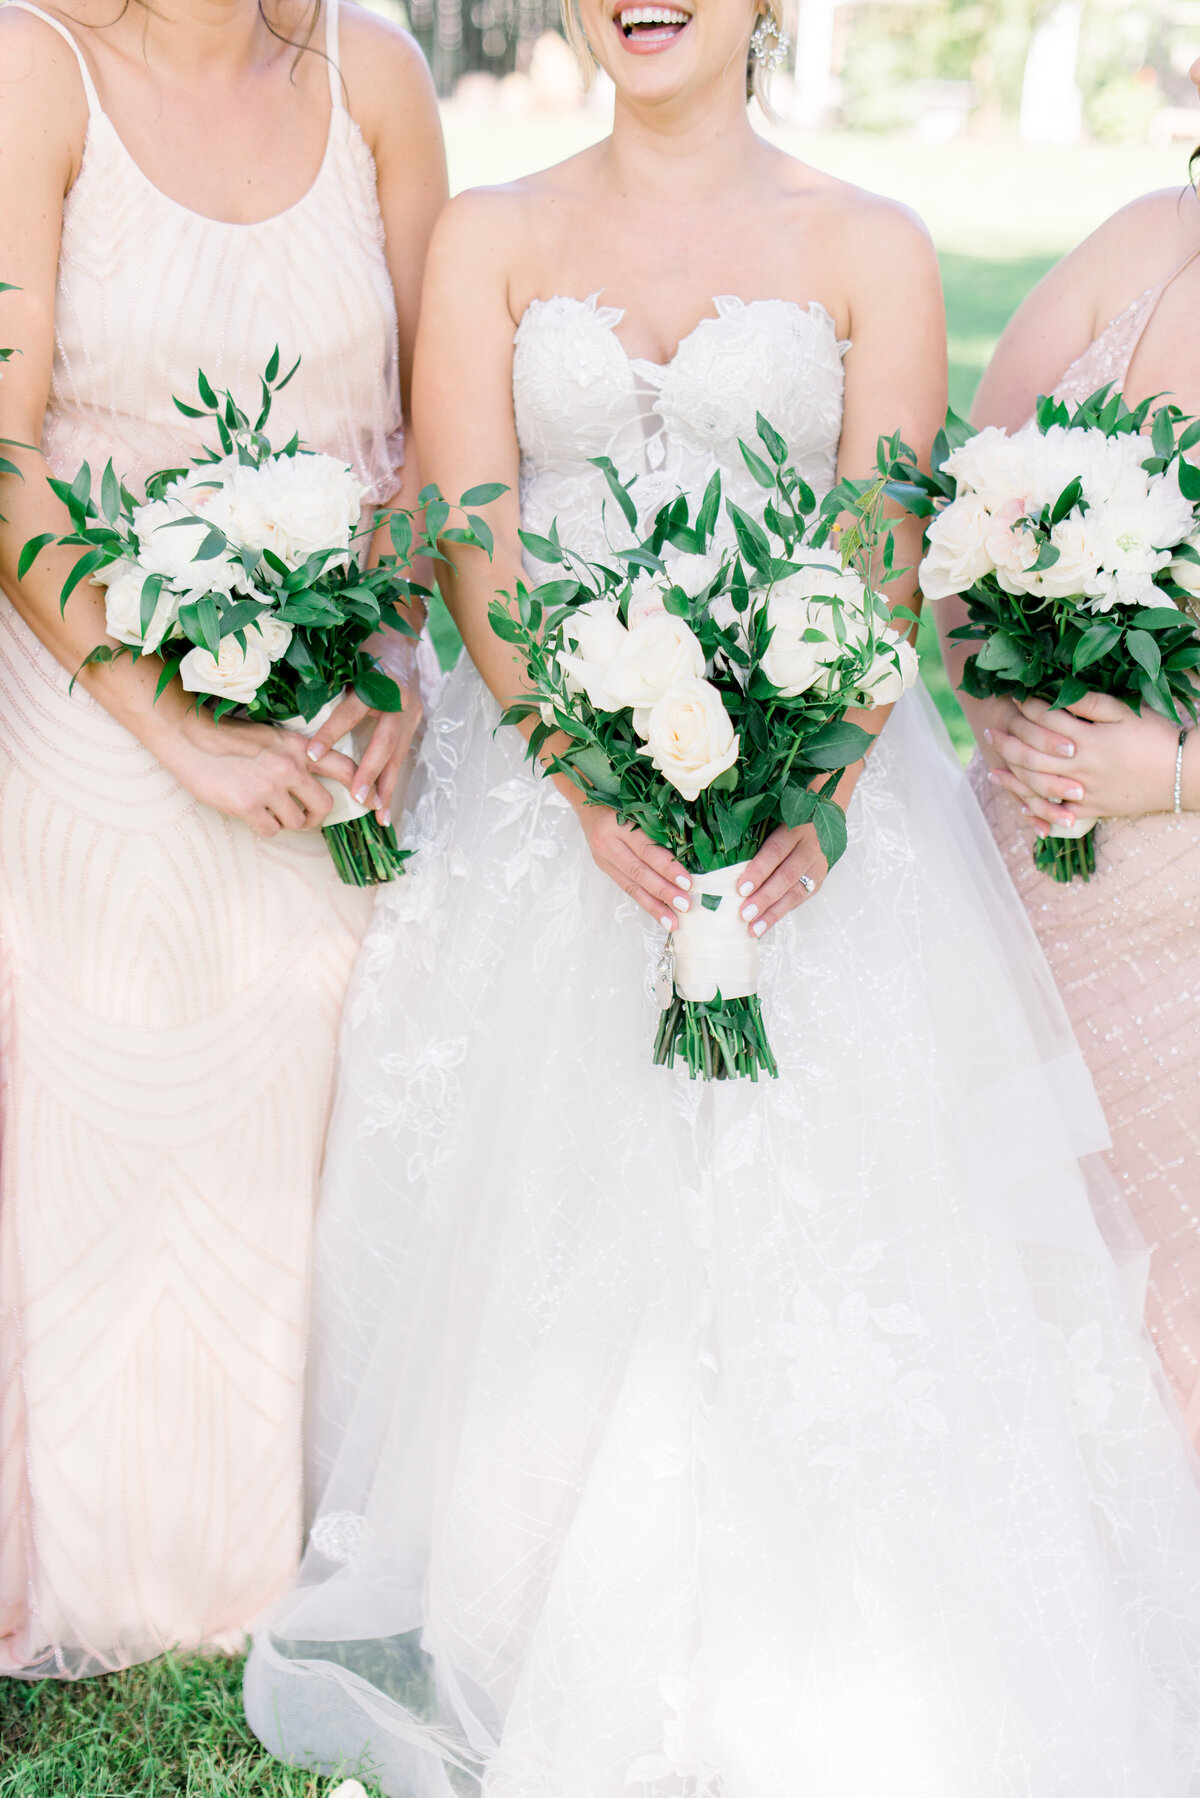 Bride and bridesmaids holding bouquets.